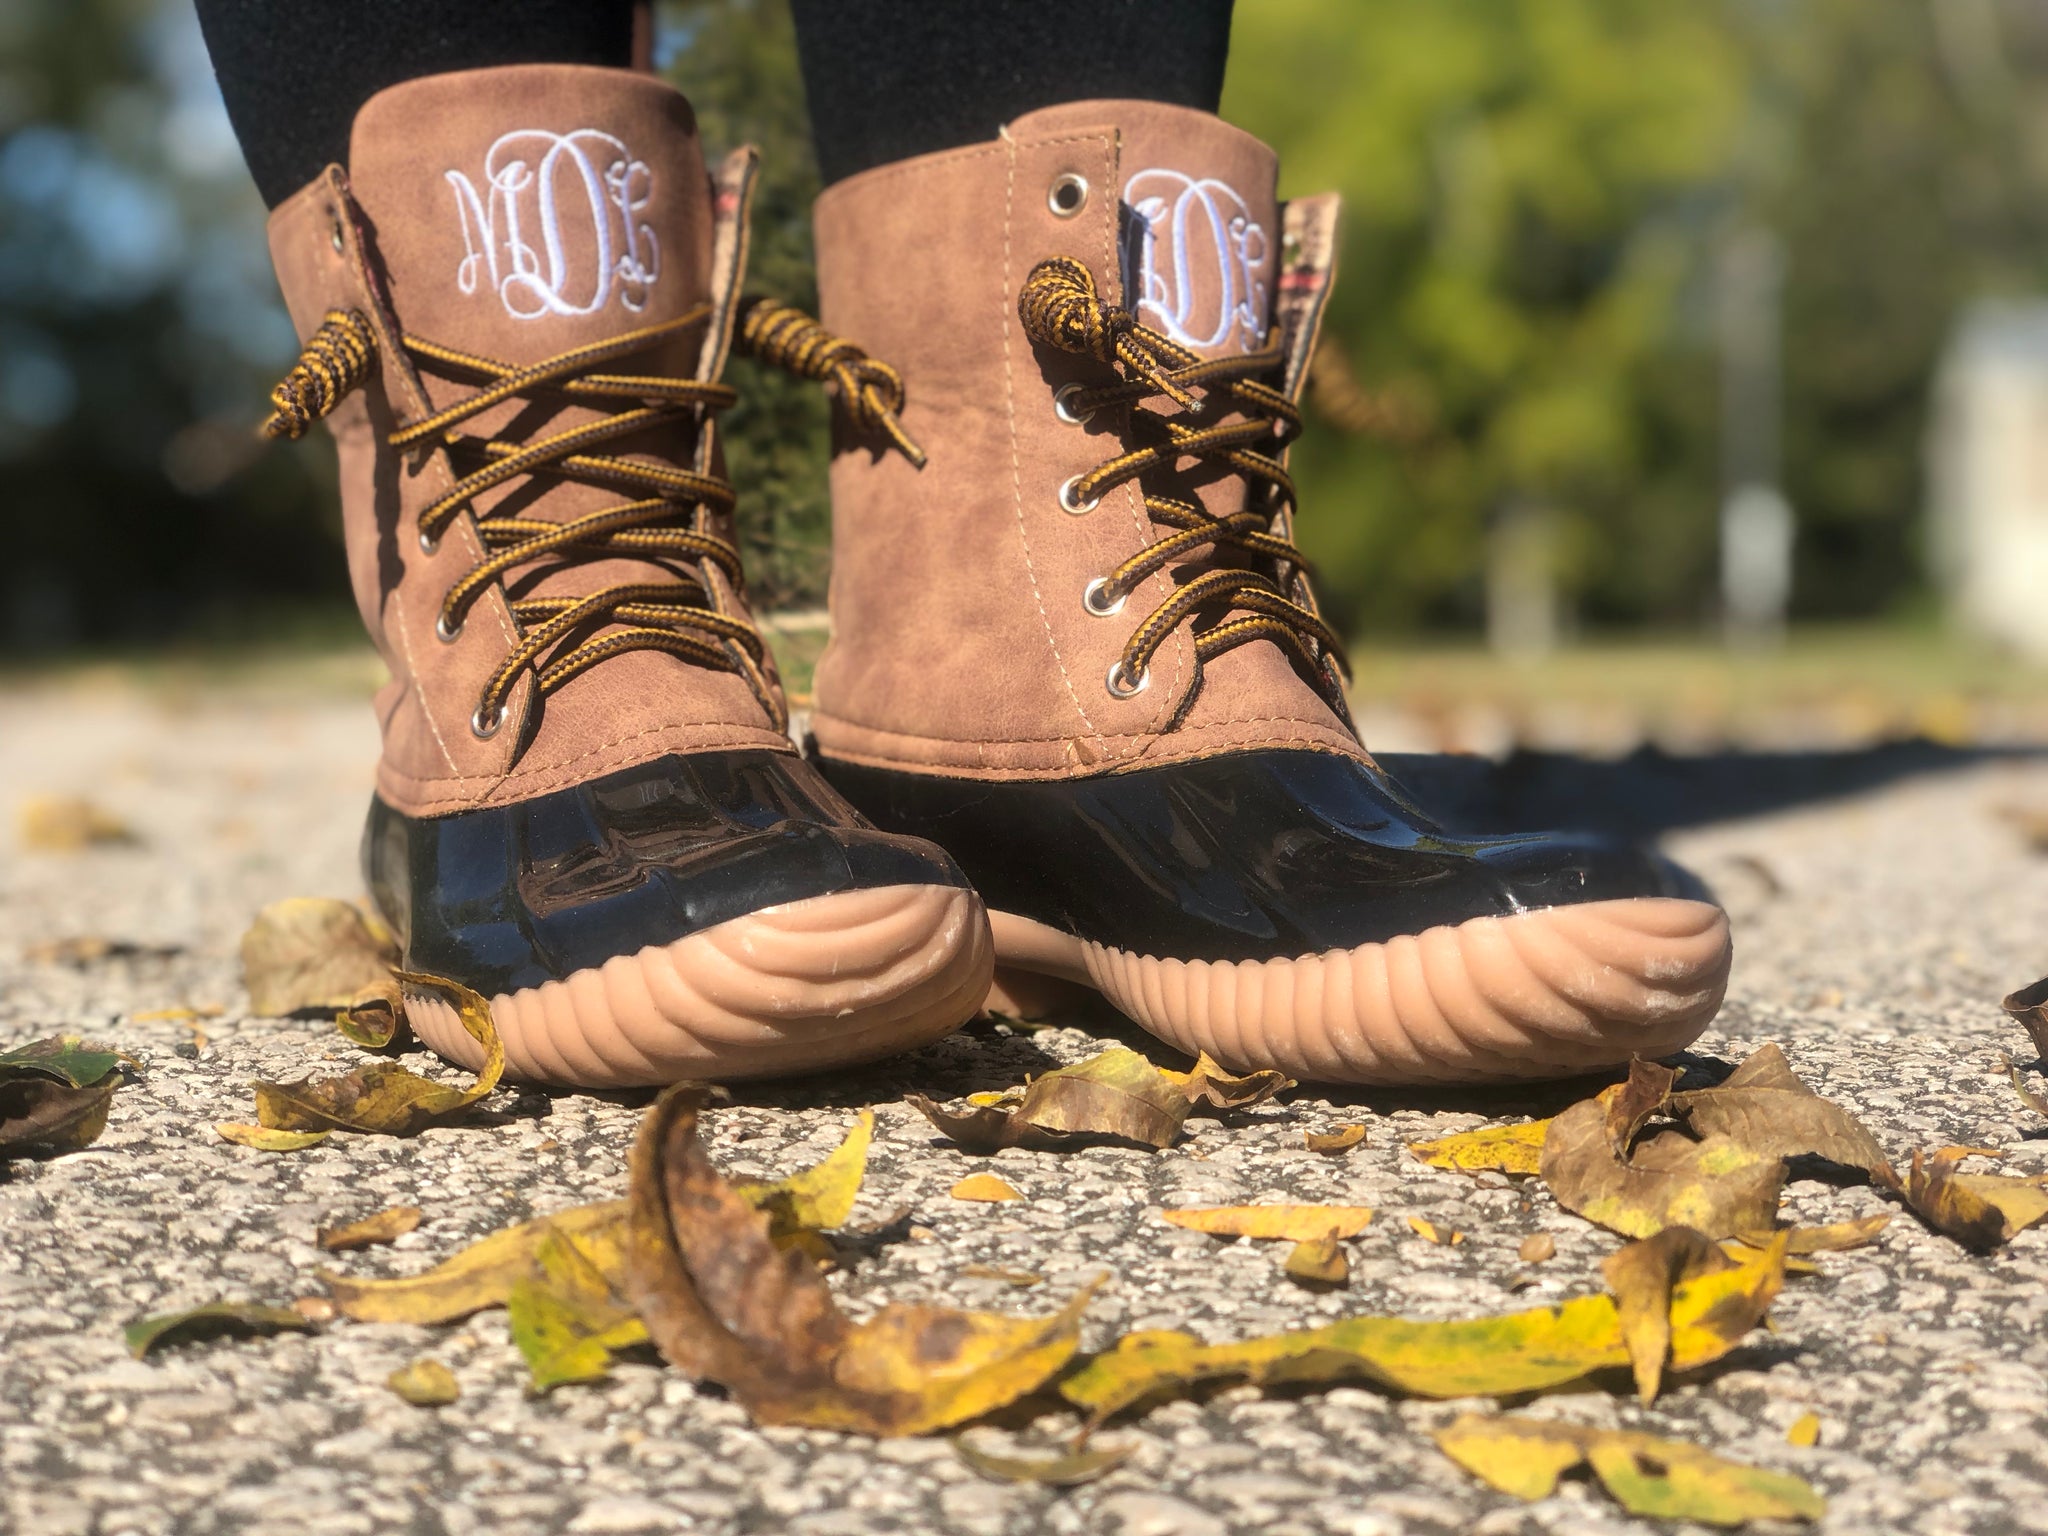 duck boots with monogram